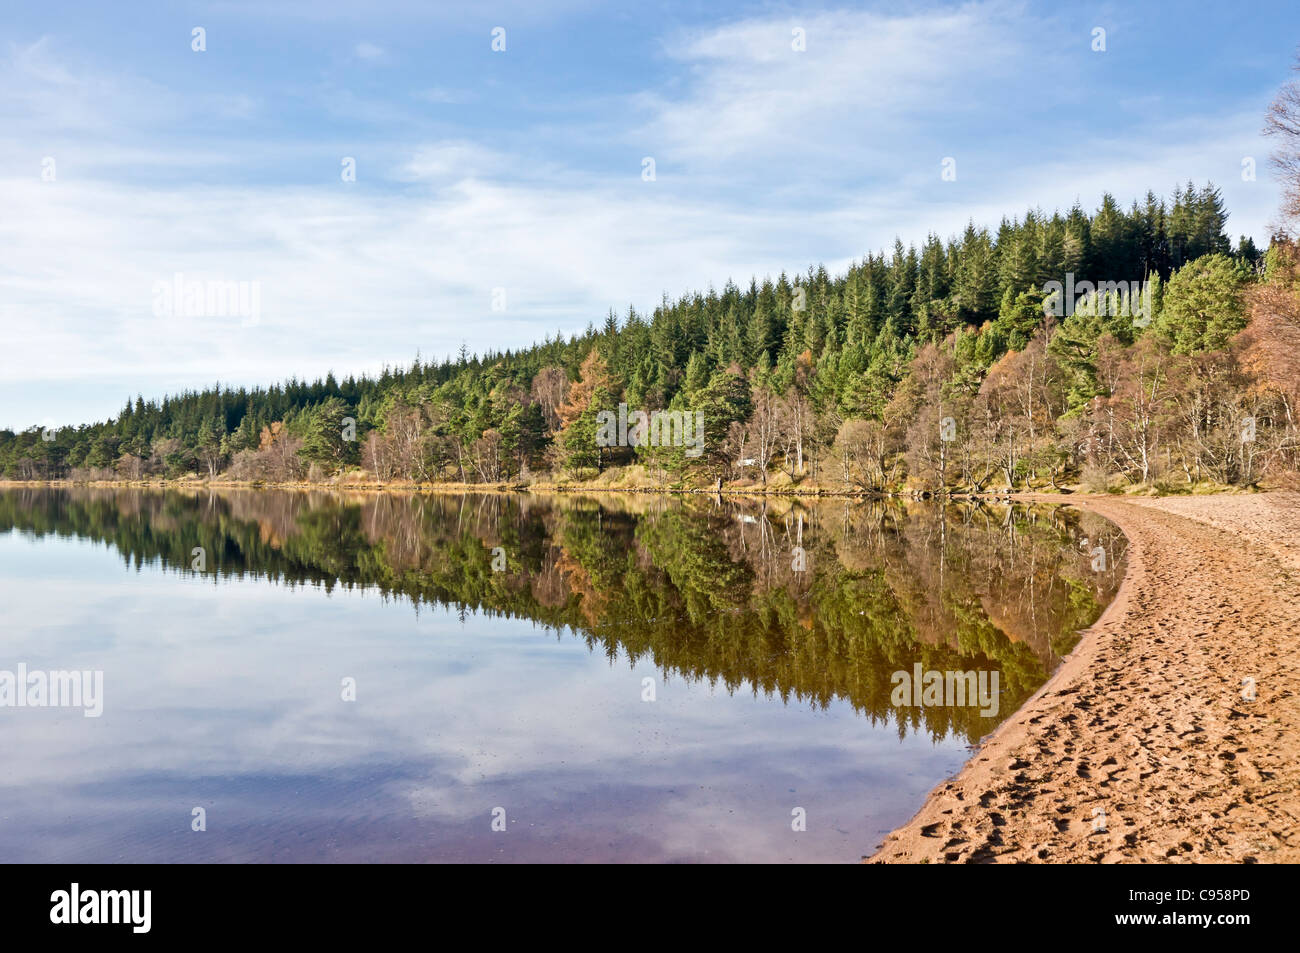 Loch Morlich and beach in the Cairngorms region of Scotland on a calm and sunny autumn day Stock Photo